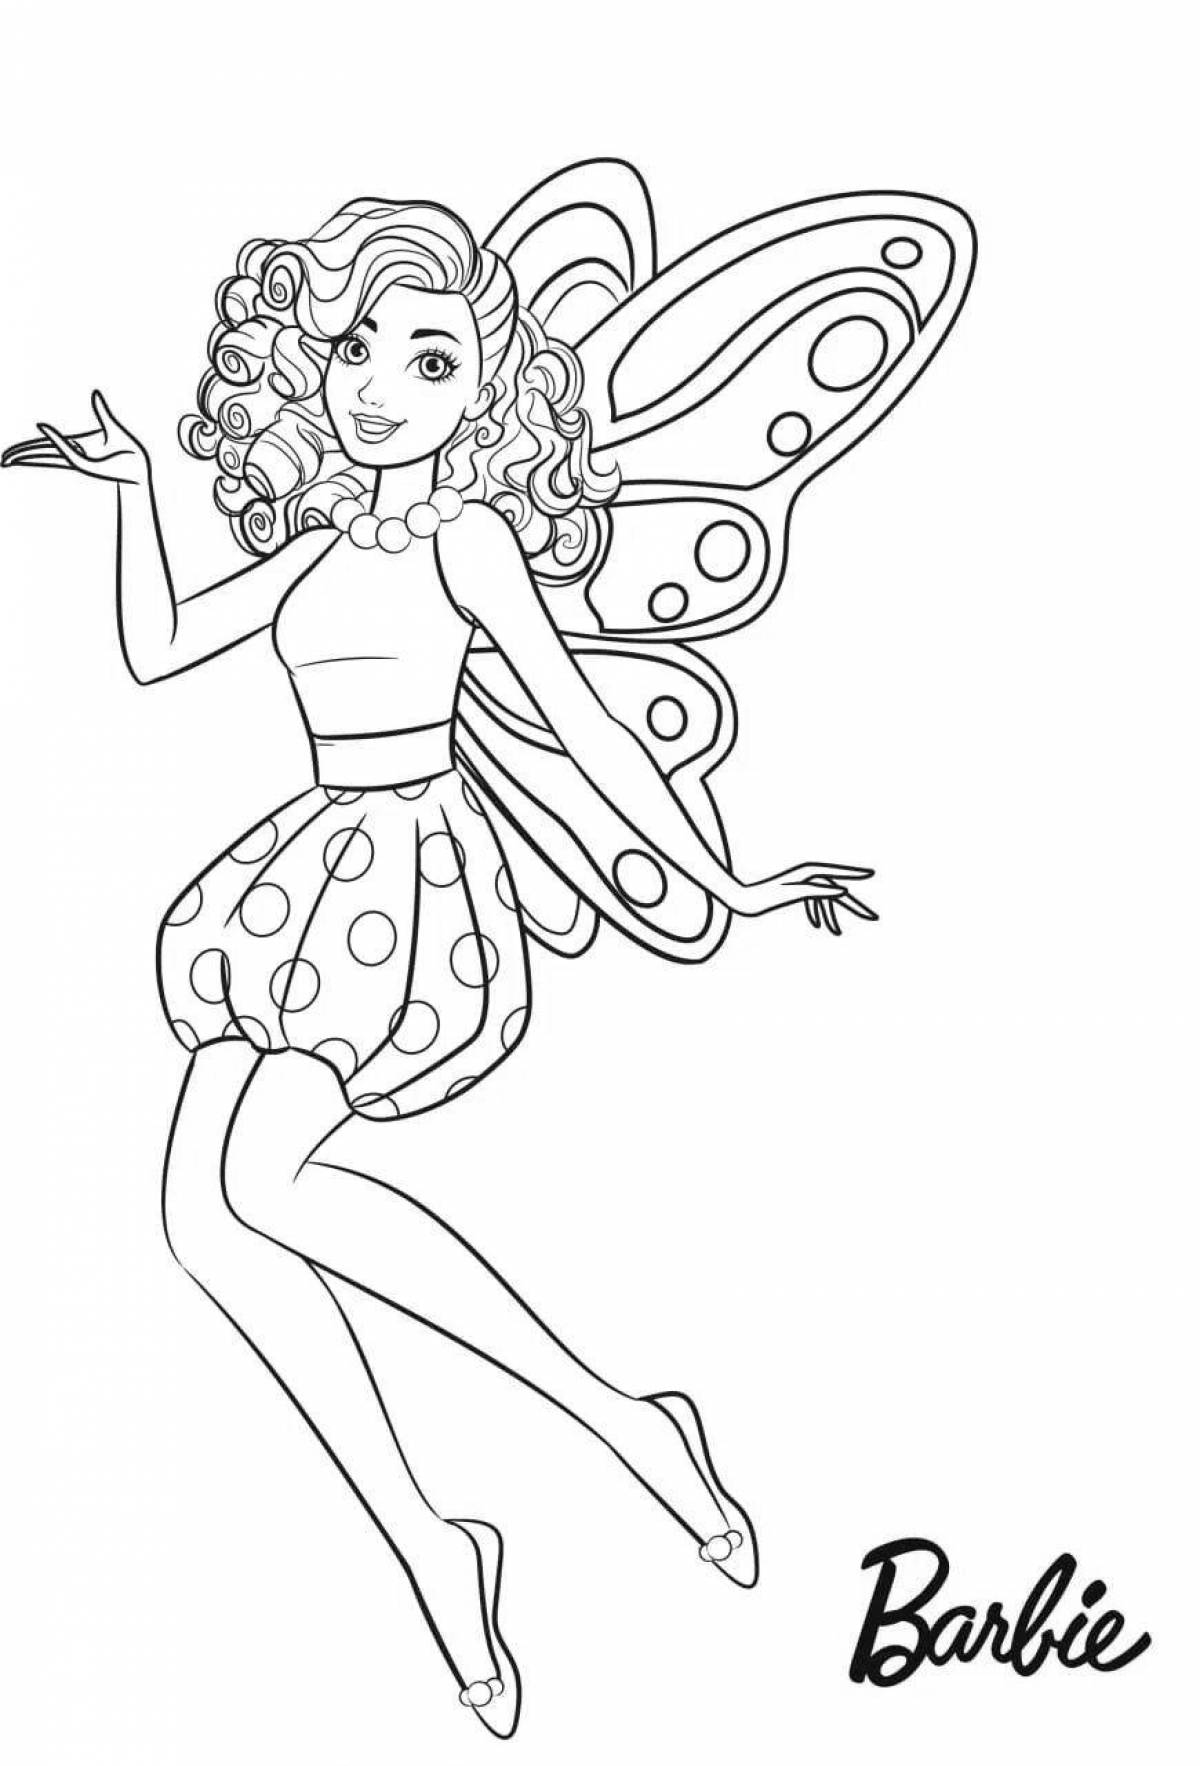 Glorious fairy barbie coloring page